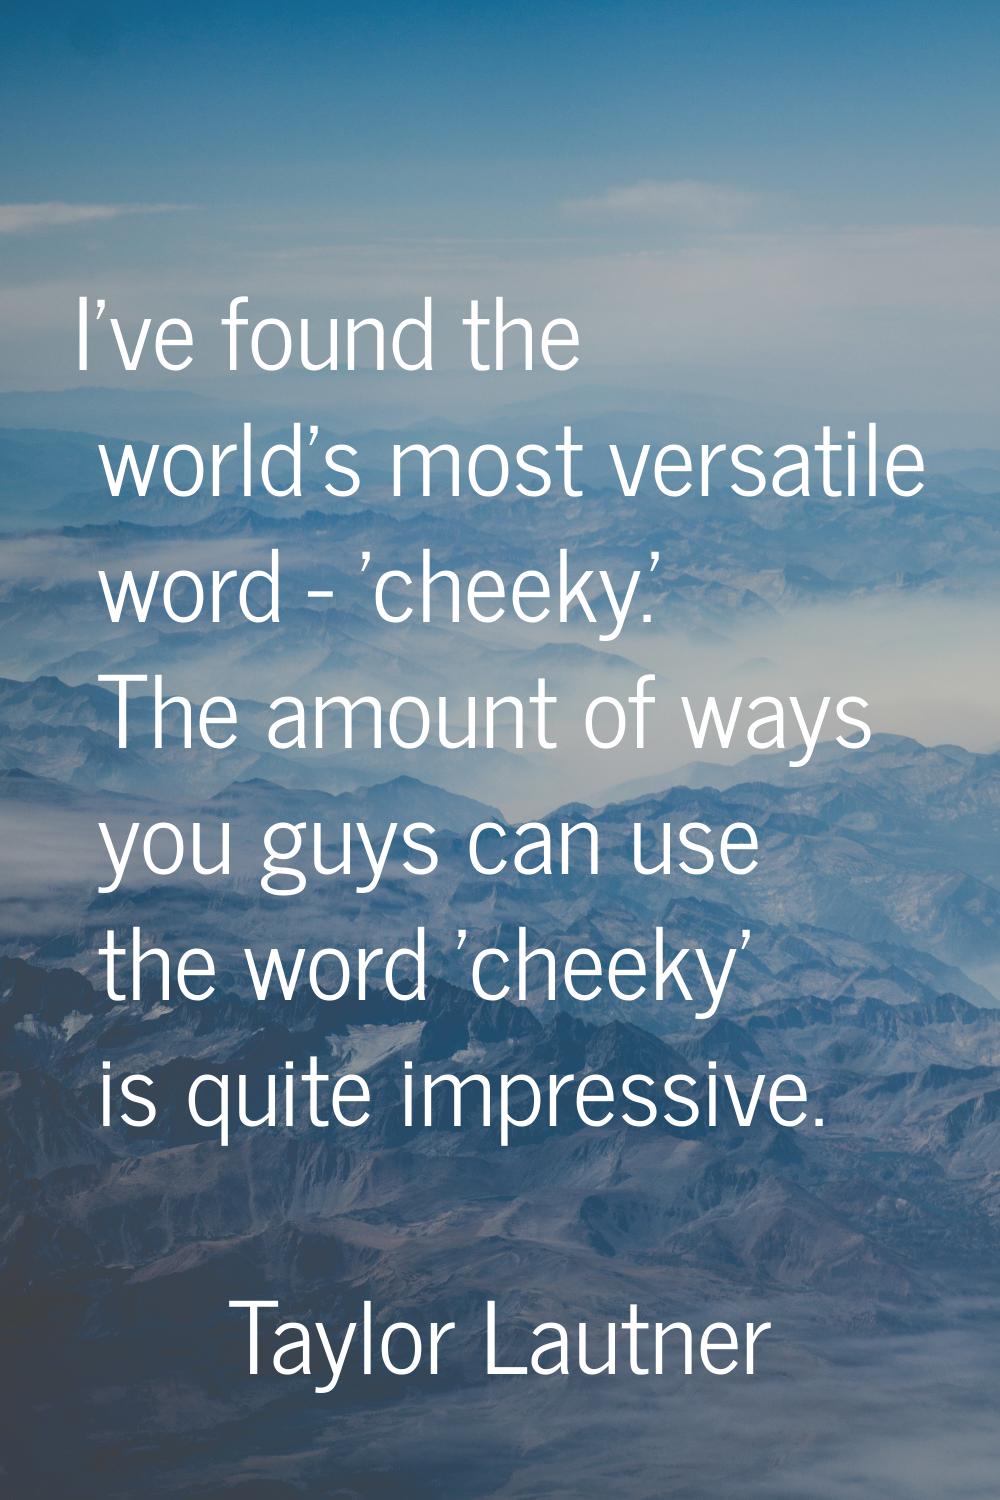 I've found the world's most versatile word - 'cheeky.' The amount of ways you guys can use the word